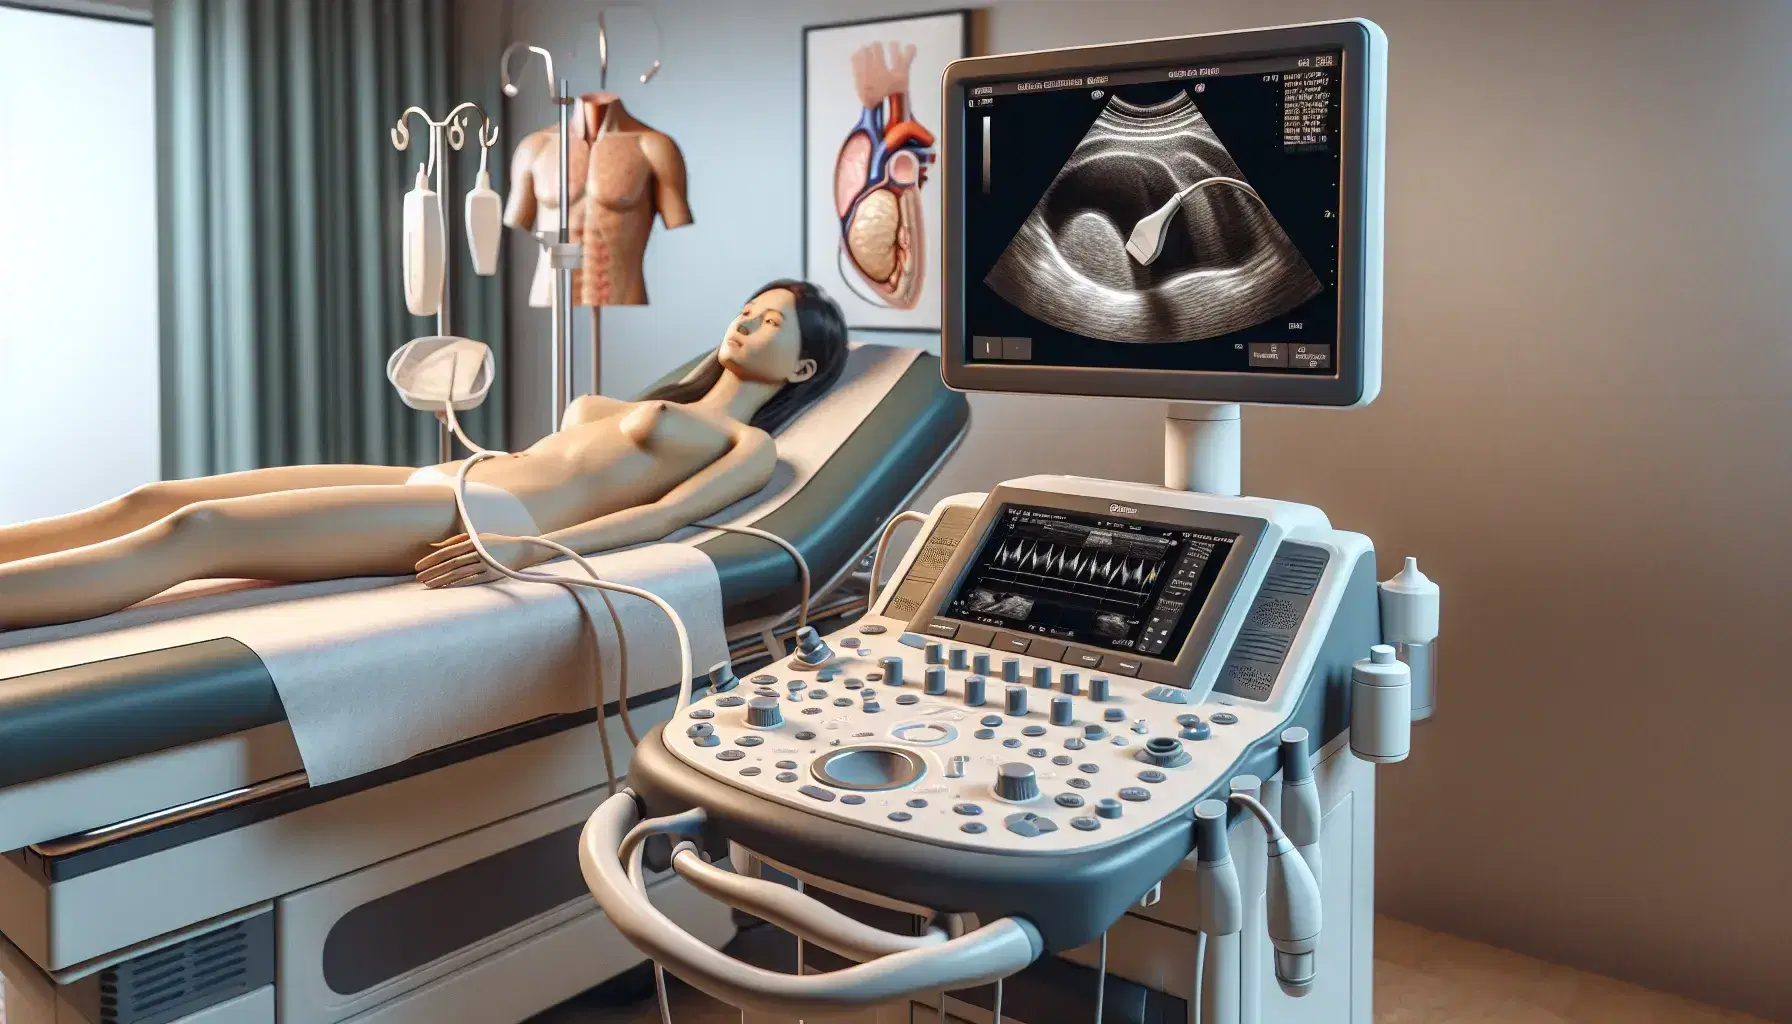 Modern ultrasound machine with large screen, displaying sonogram, beside an anatomical mannequin on an exam bed, with a medical professional conducting a scan.